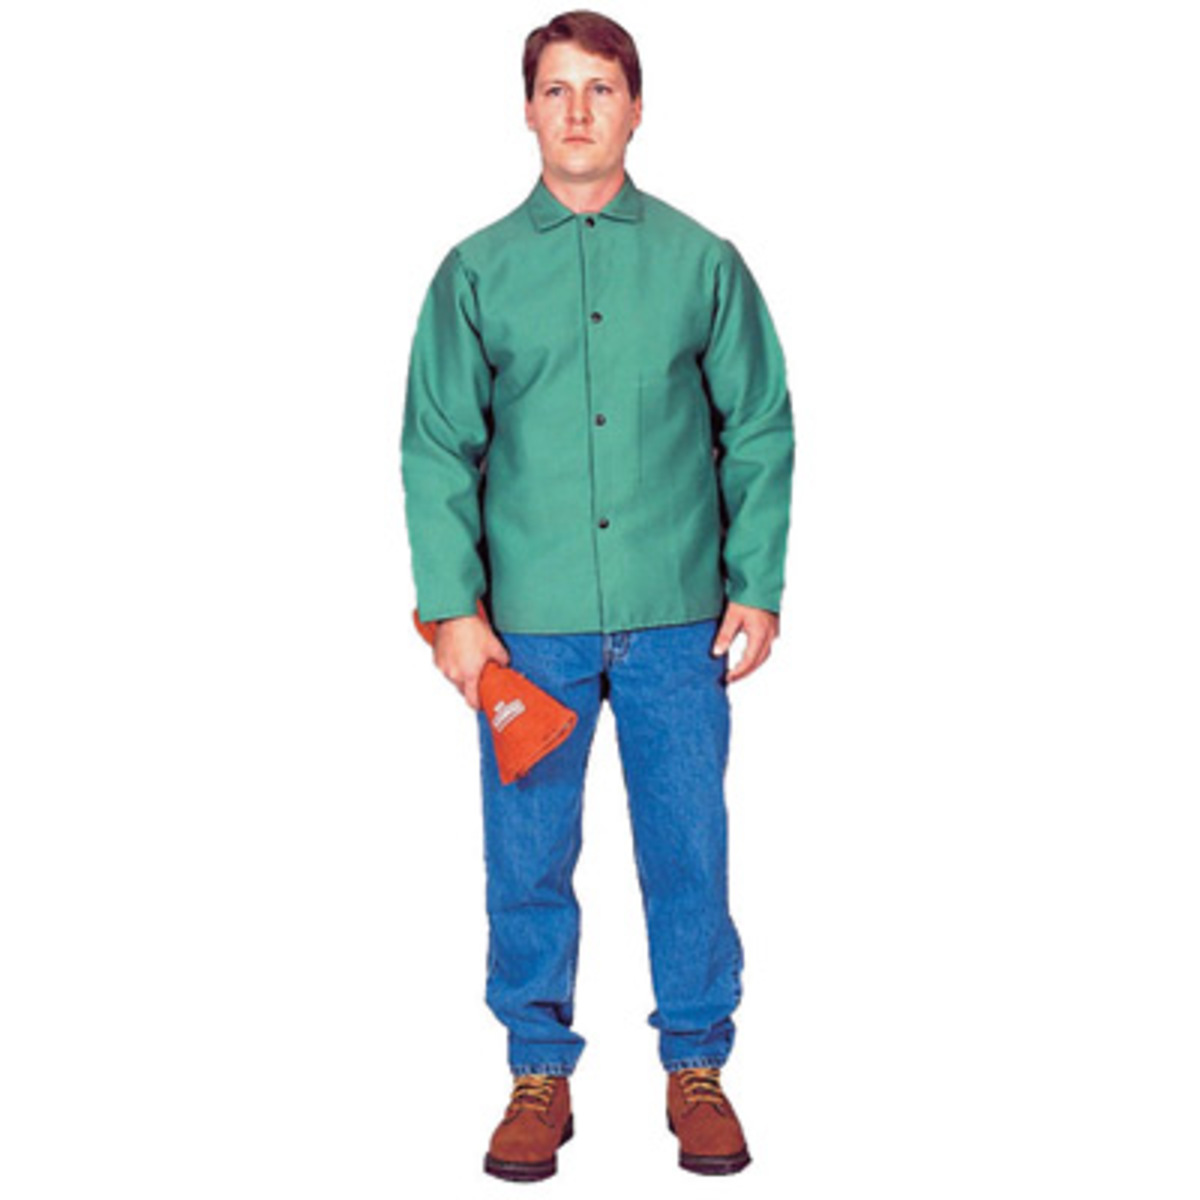 Stanco Safety Products™ Large Green Cotton Flame Resistant Welding Jacket With Snap Closure